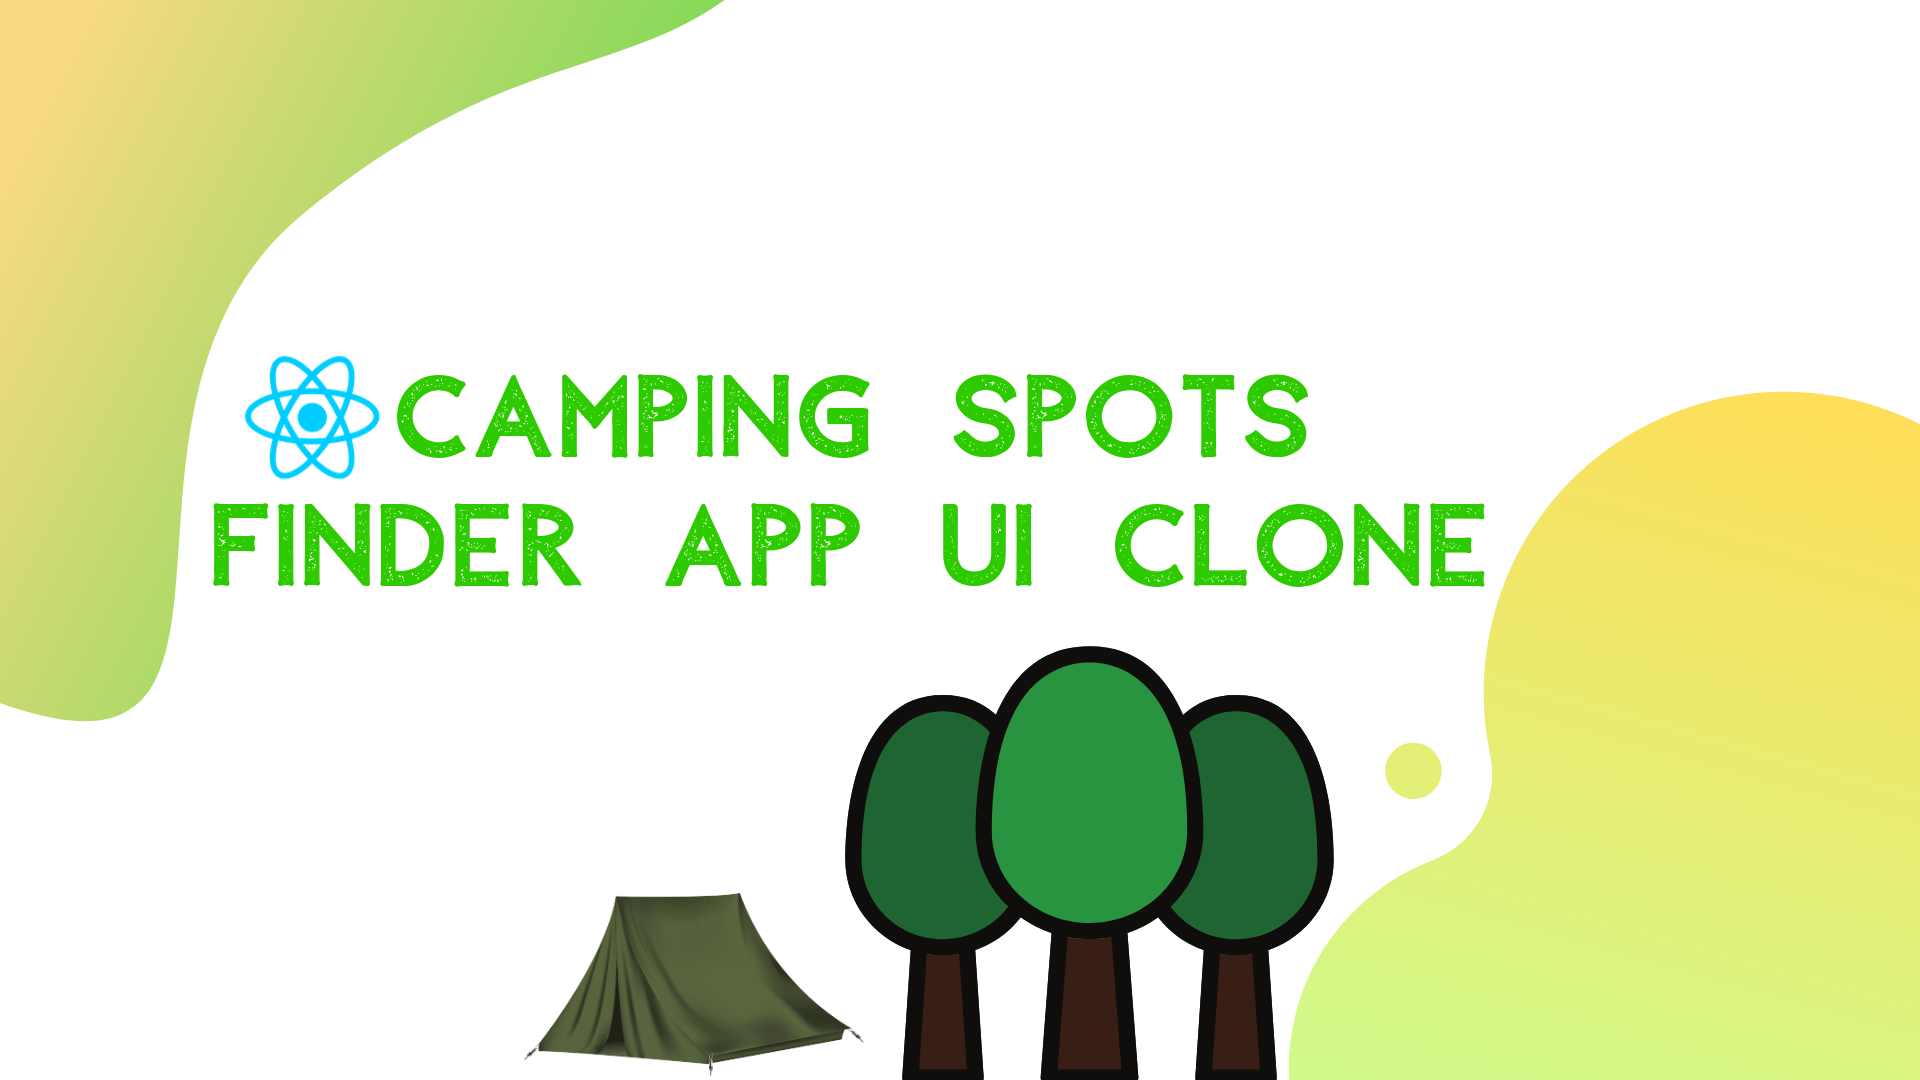 Camping Spots Finder App UI Clone with React Native #1 : Map view UI